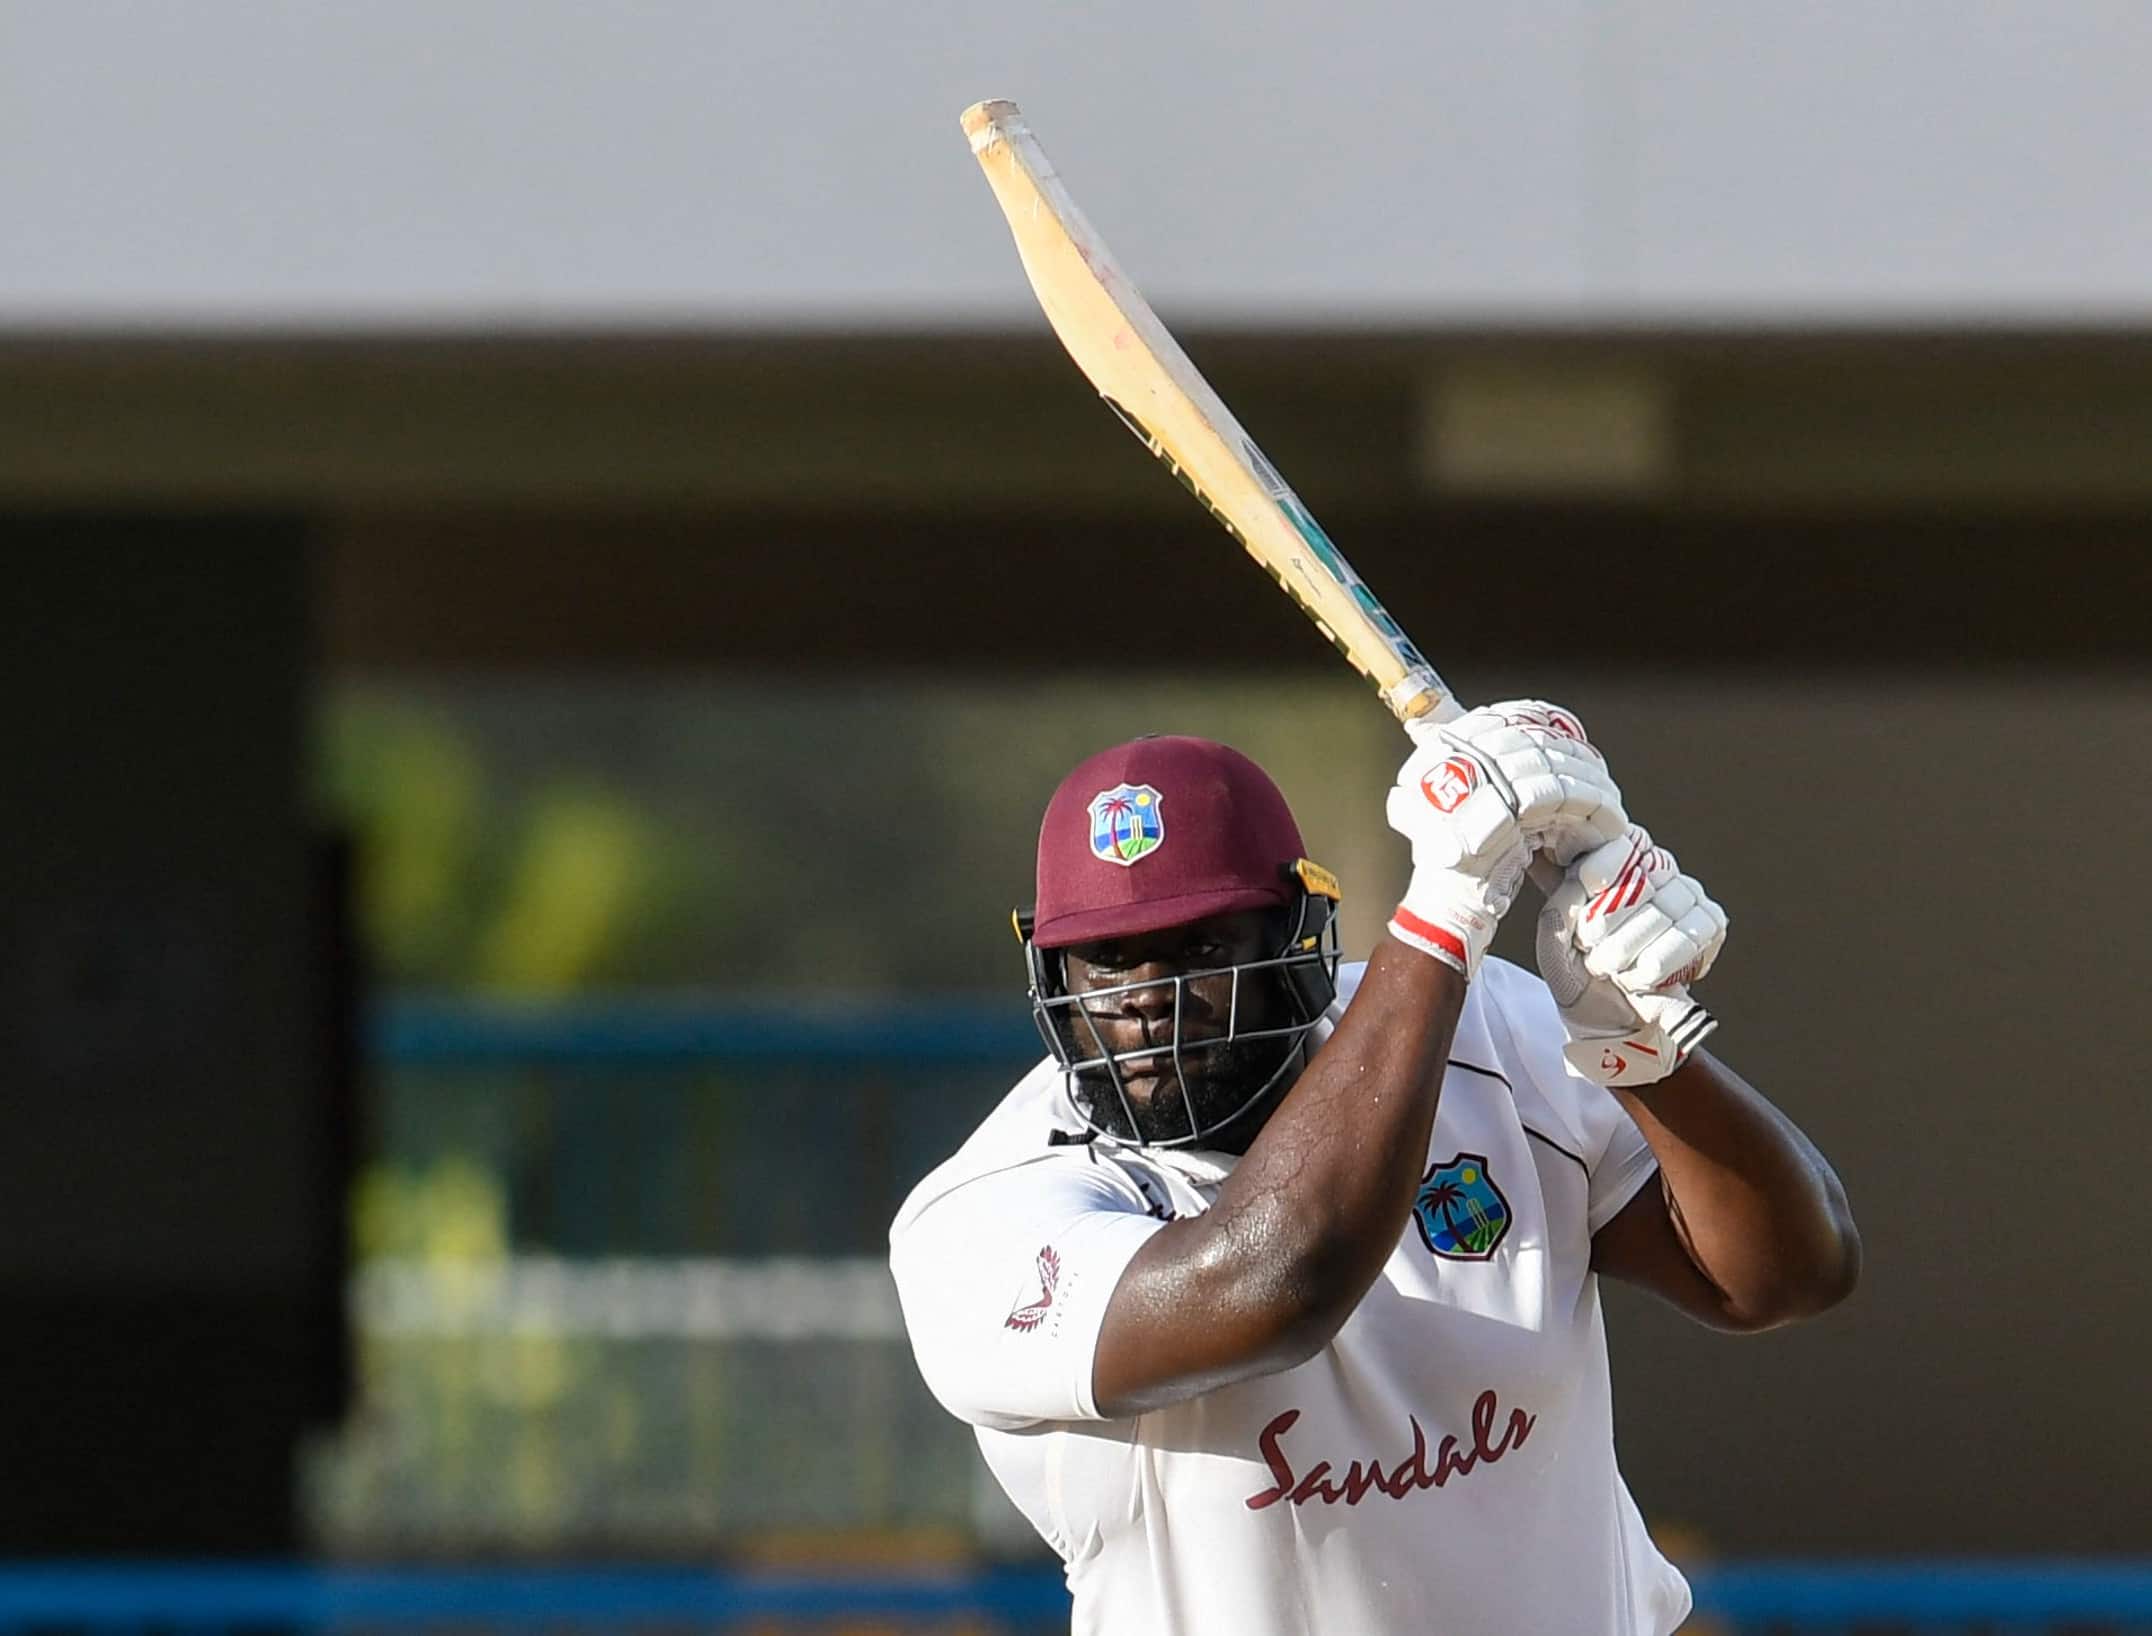 West Indies all-rounder Rahkeem Cornwall en route to scoring unbeaten 43 on Day 1 of second Test against Sri Lanka. (Photo: Cricket West Indies)